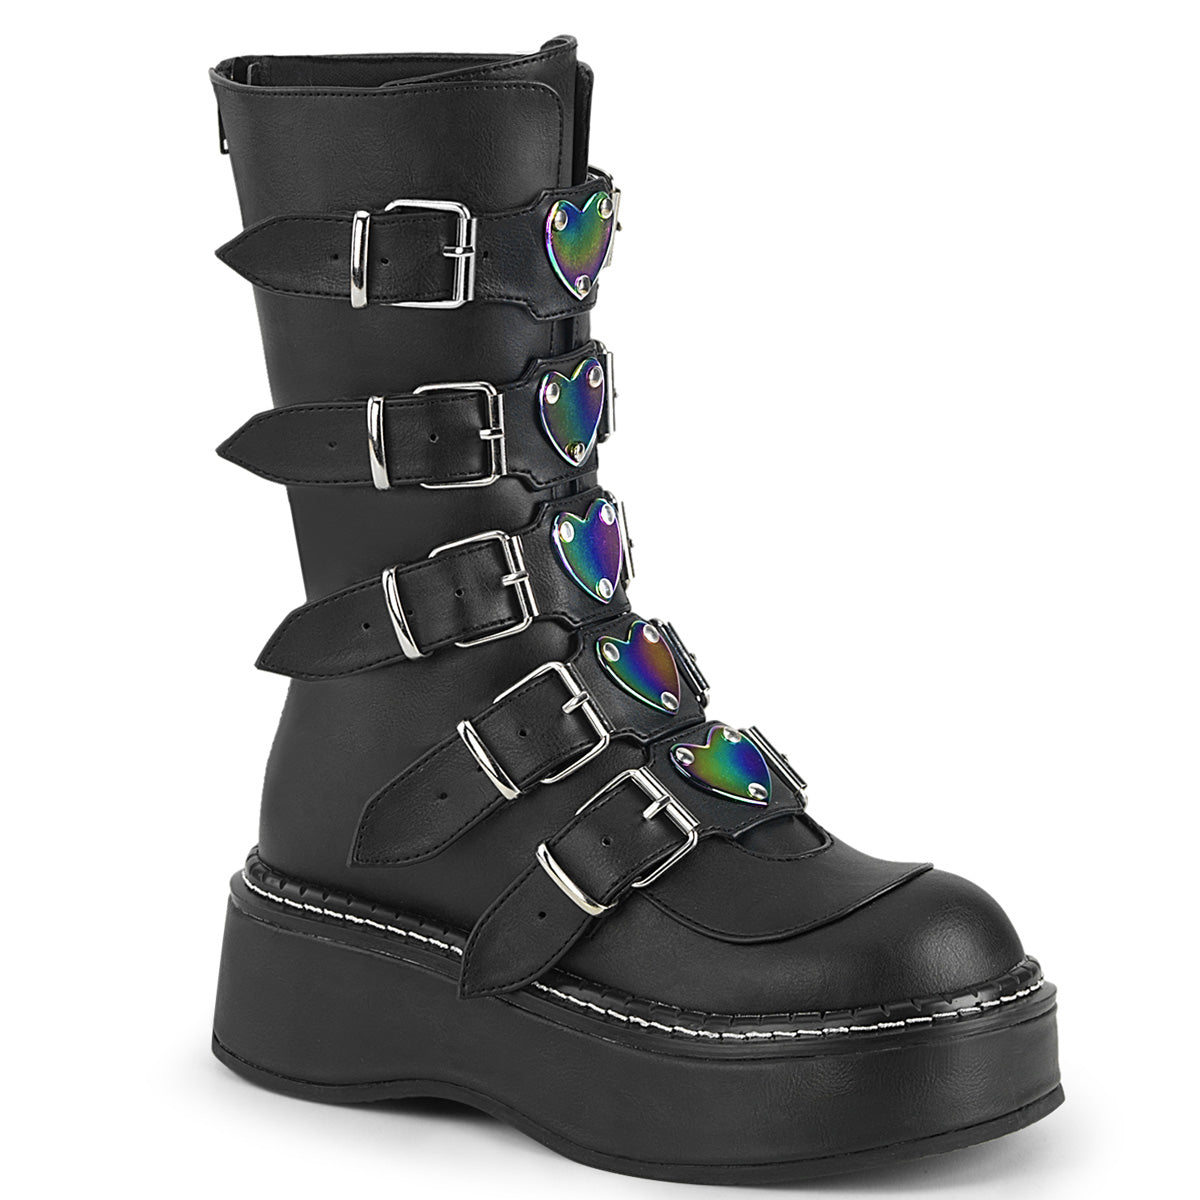 DemoniaCult Womens Boots EMILY-330 Blk Vegan Leather